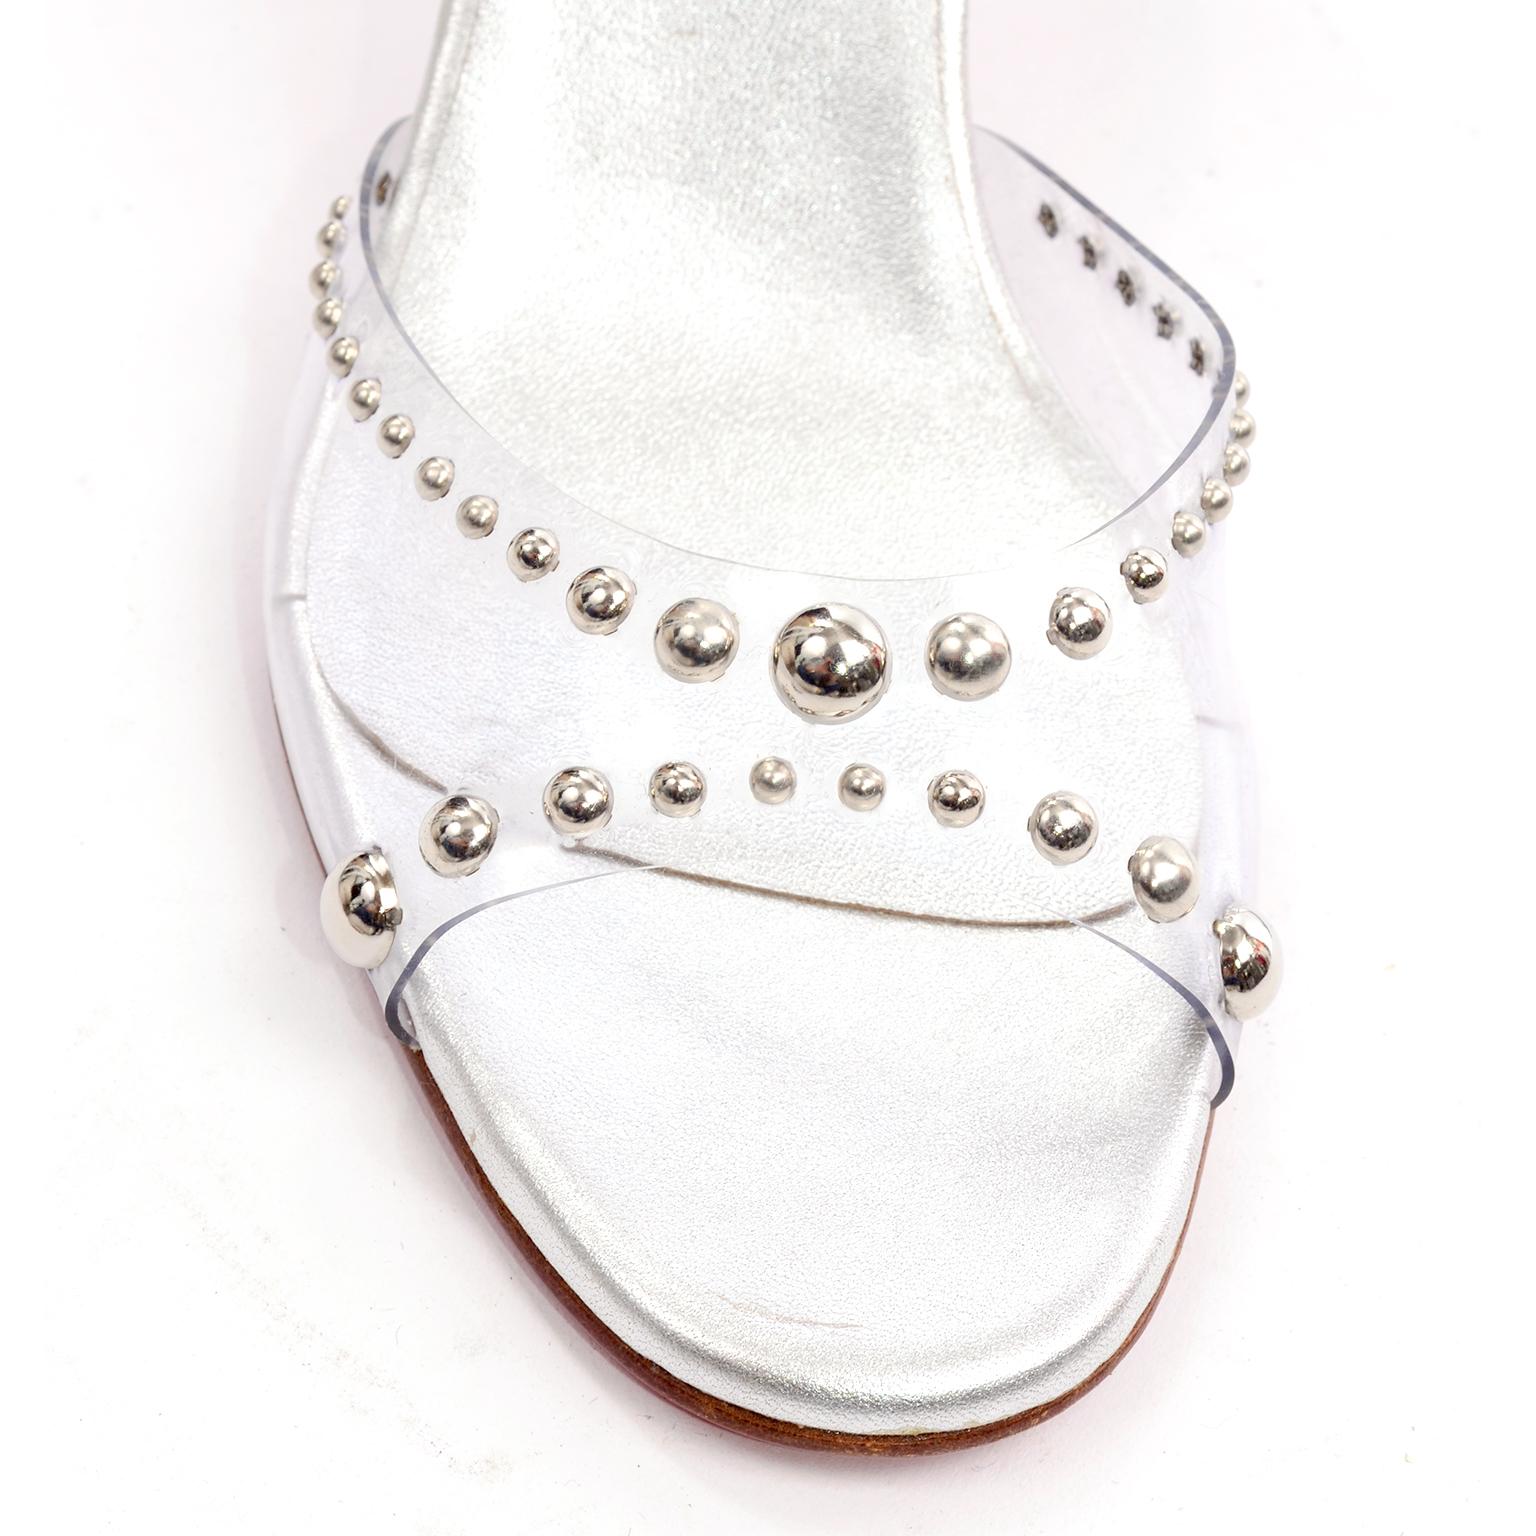 Never Worn Christian Louboutin Shoes Clear Open Toe Slides w Silver Studs Sz 39 1